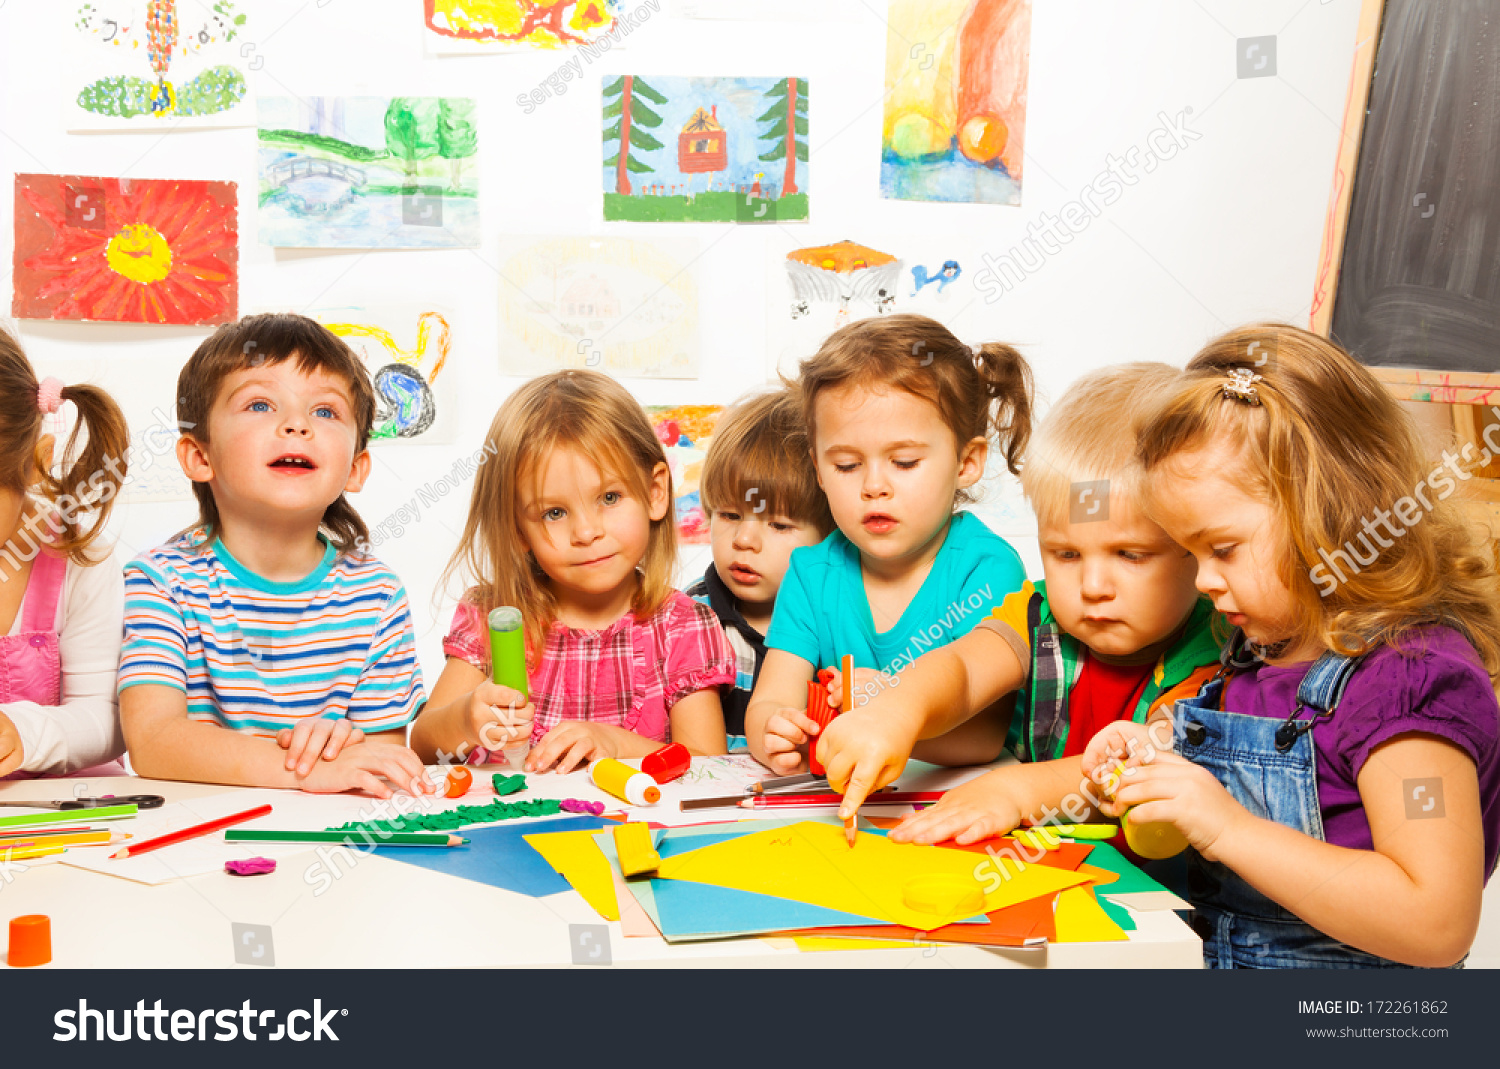 Group of little kids painting with pencils and gluing with glue stick on art class in kindergarten #172261862